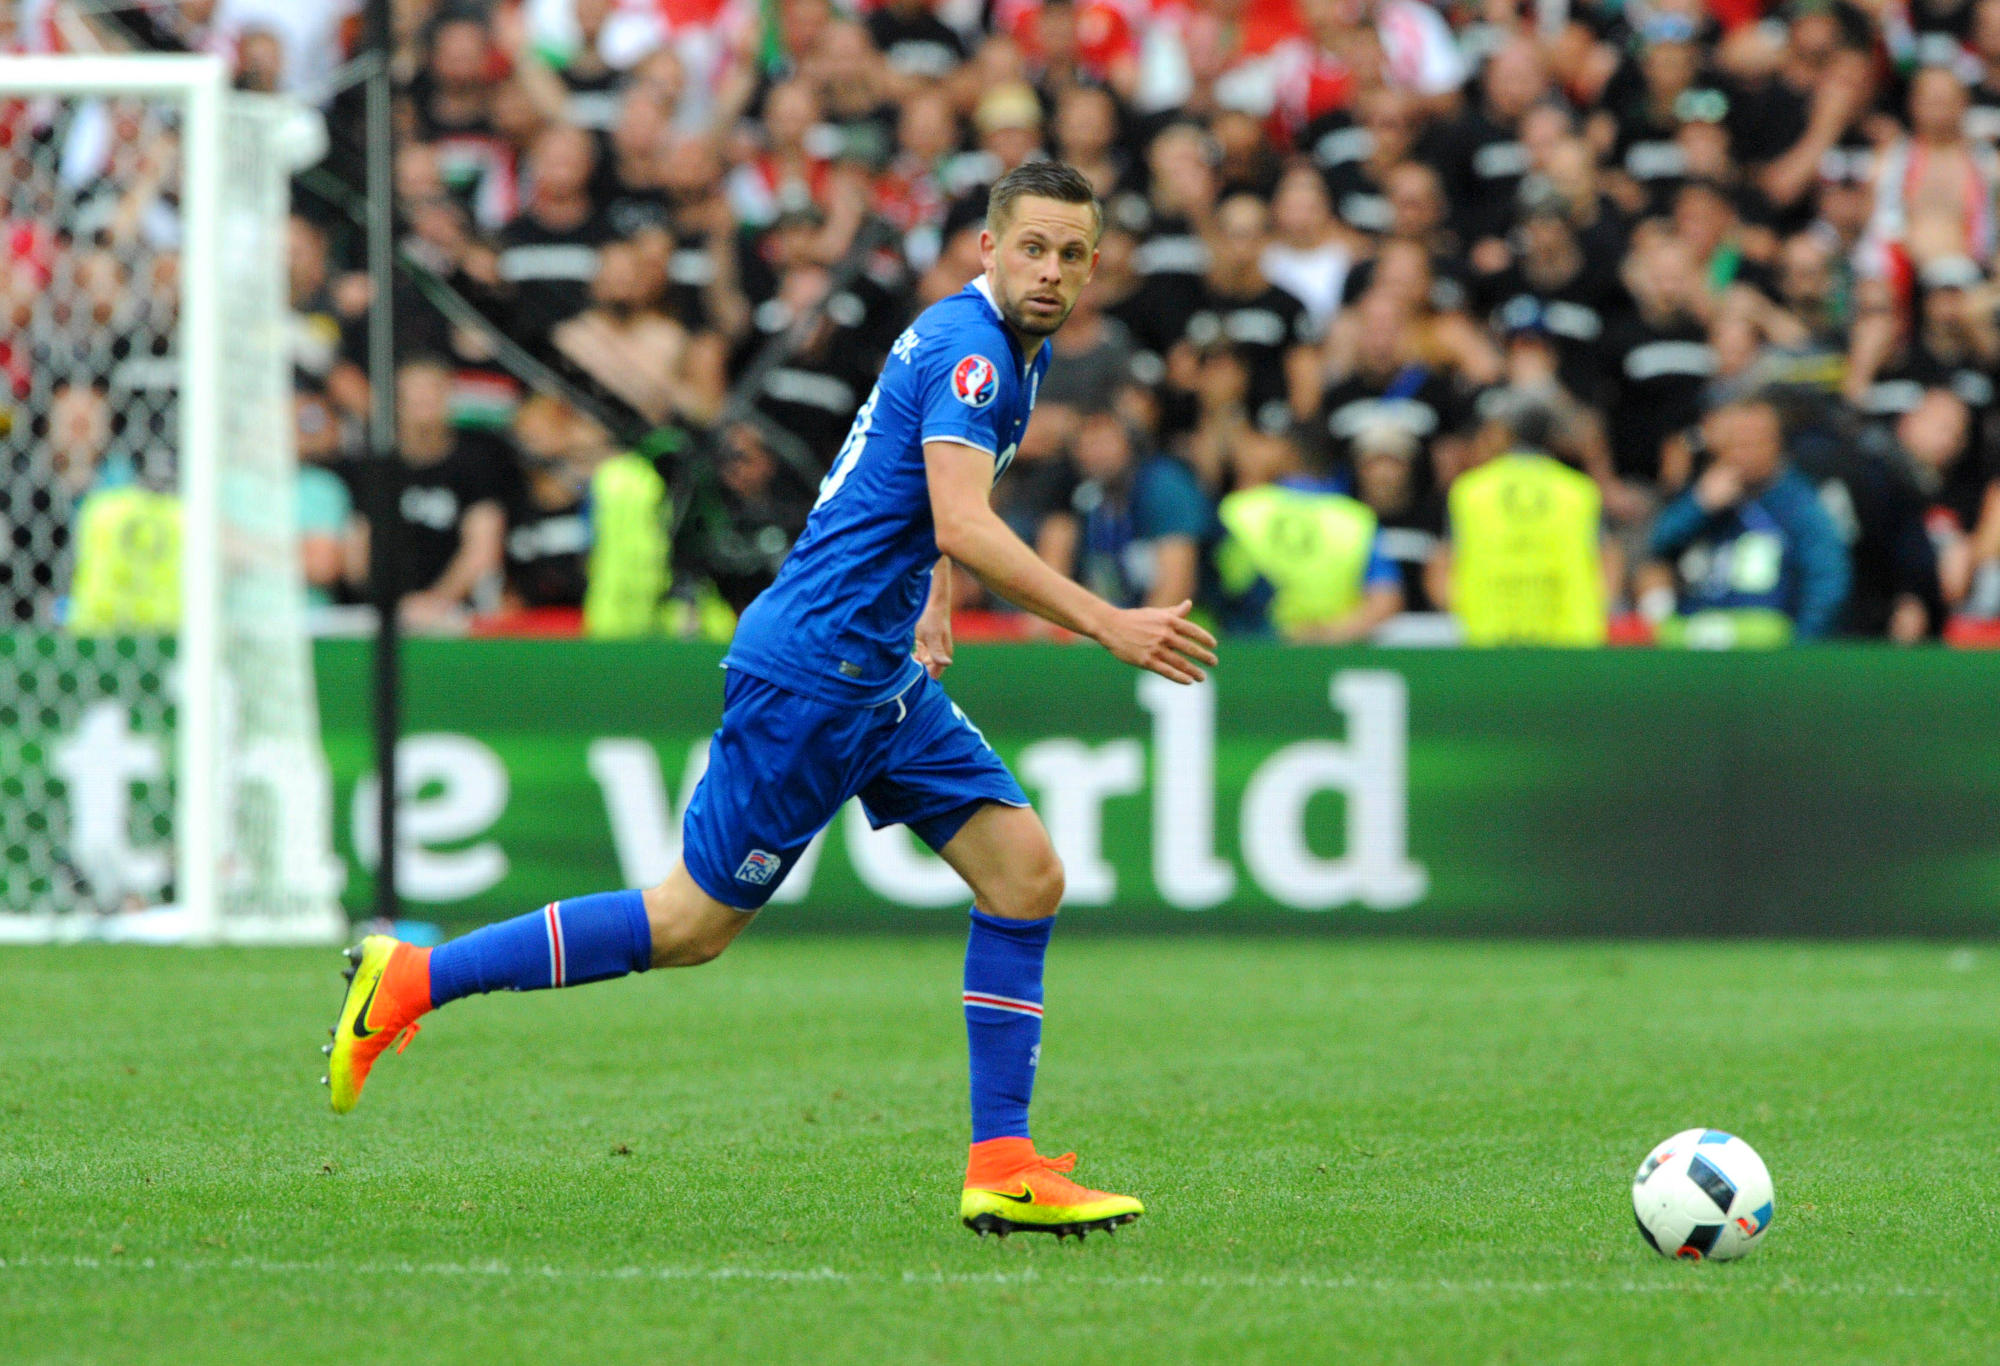 Iceland's Gylfi Sigurdsson takes the ball up against Hungary